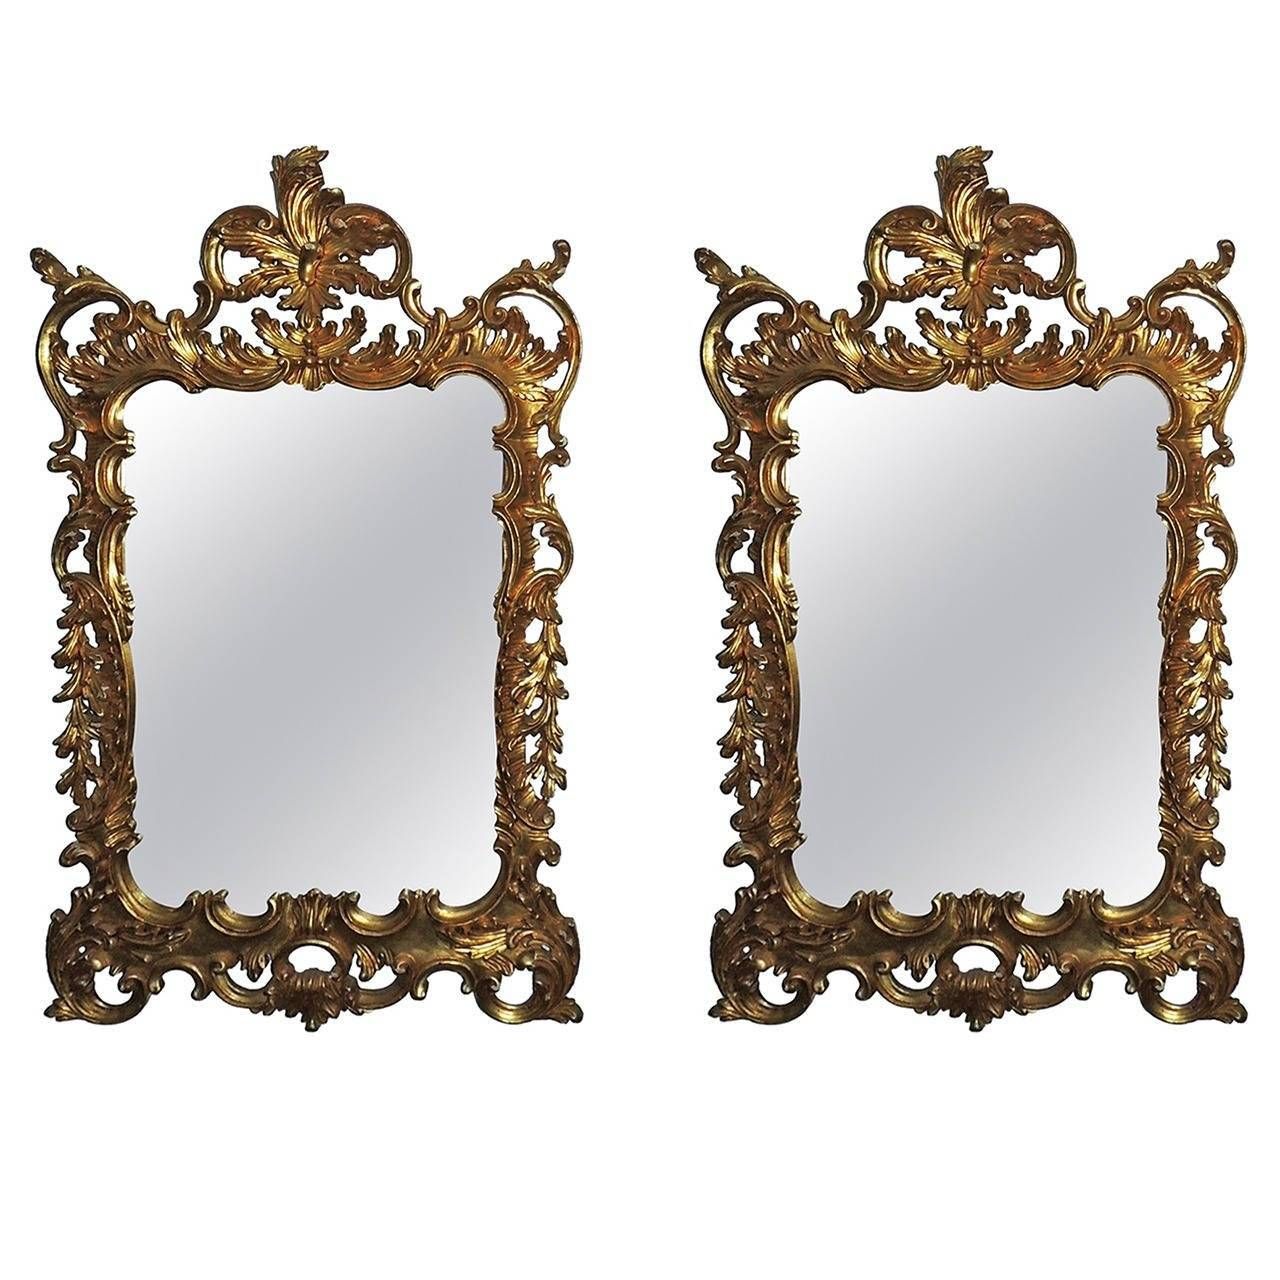 Wonderful Pair Of Italian Gilt Carved Wood Rococo Mirrors With Pertaining To Roccoco Mirrors (View 6 of 15)